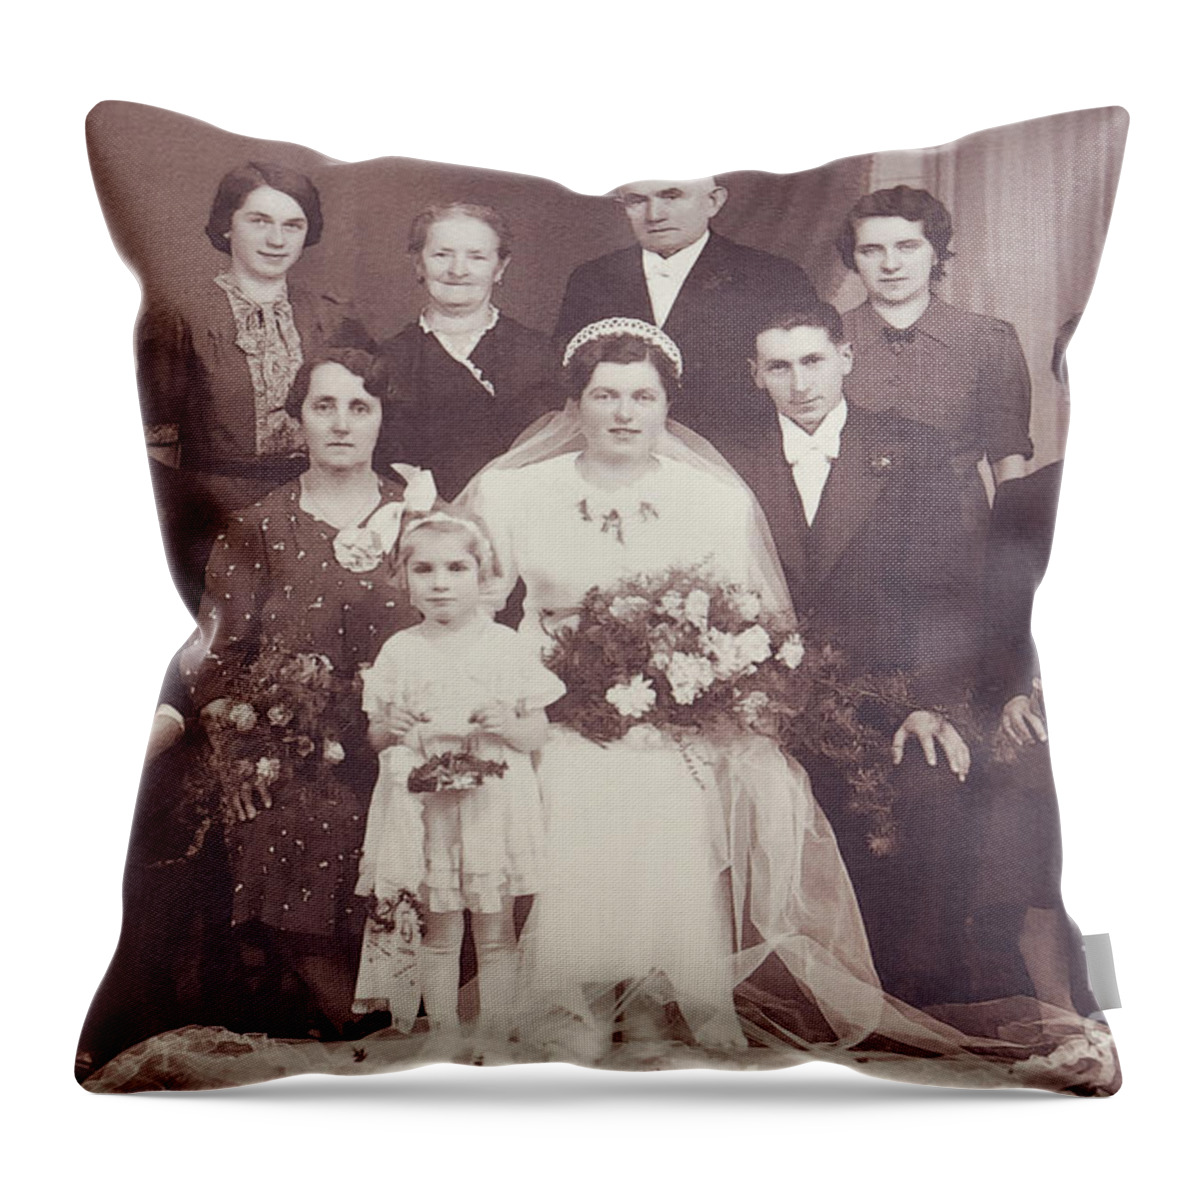 Photo Throw Pillow featuring the photograph Vintage Wedding by Jutta Maria Pusl